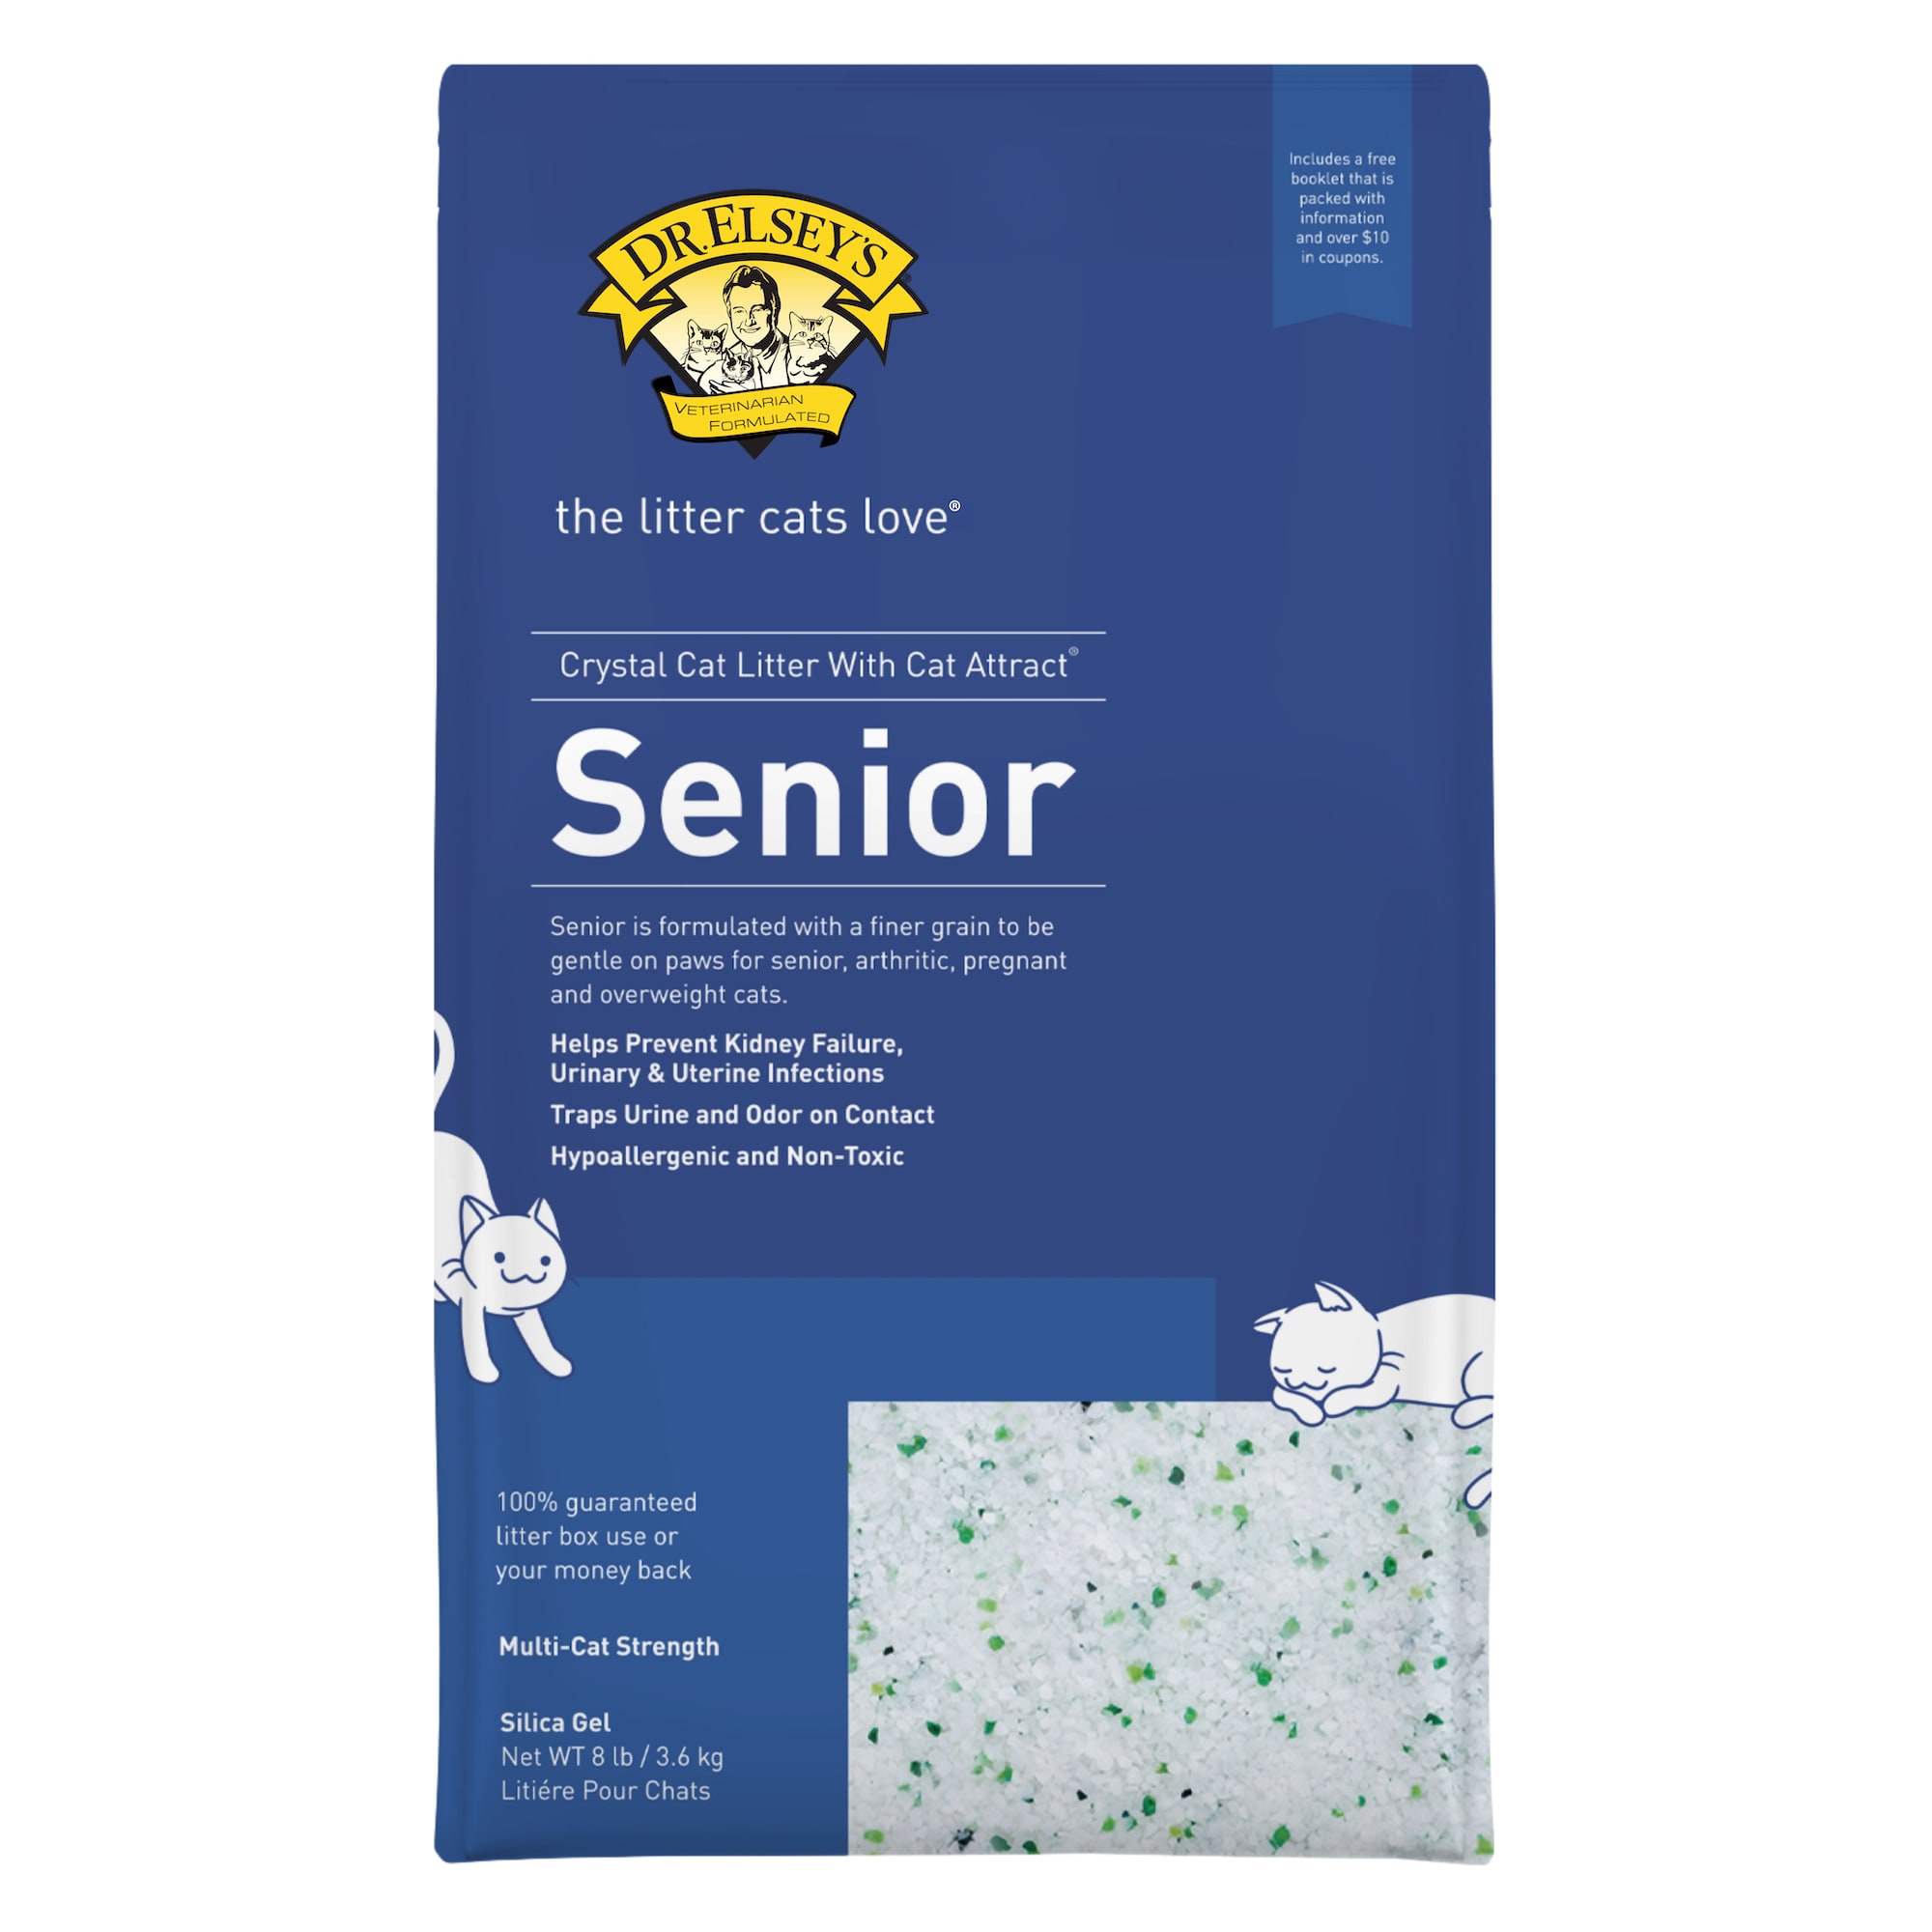 Photos - Cat Litter Box / Tray Dr. Elsey's Dr. Elsey's Senior Cat Silica Gel Litter, 8 lbs., 8 lbs 648